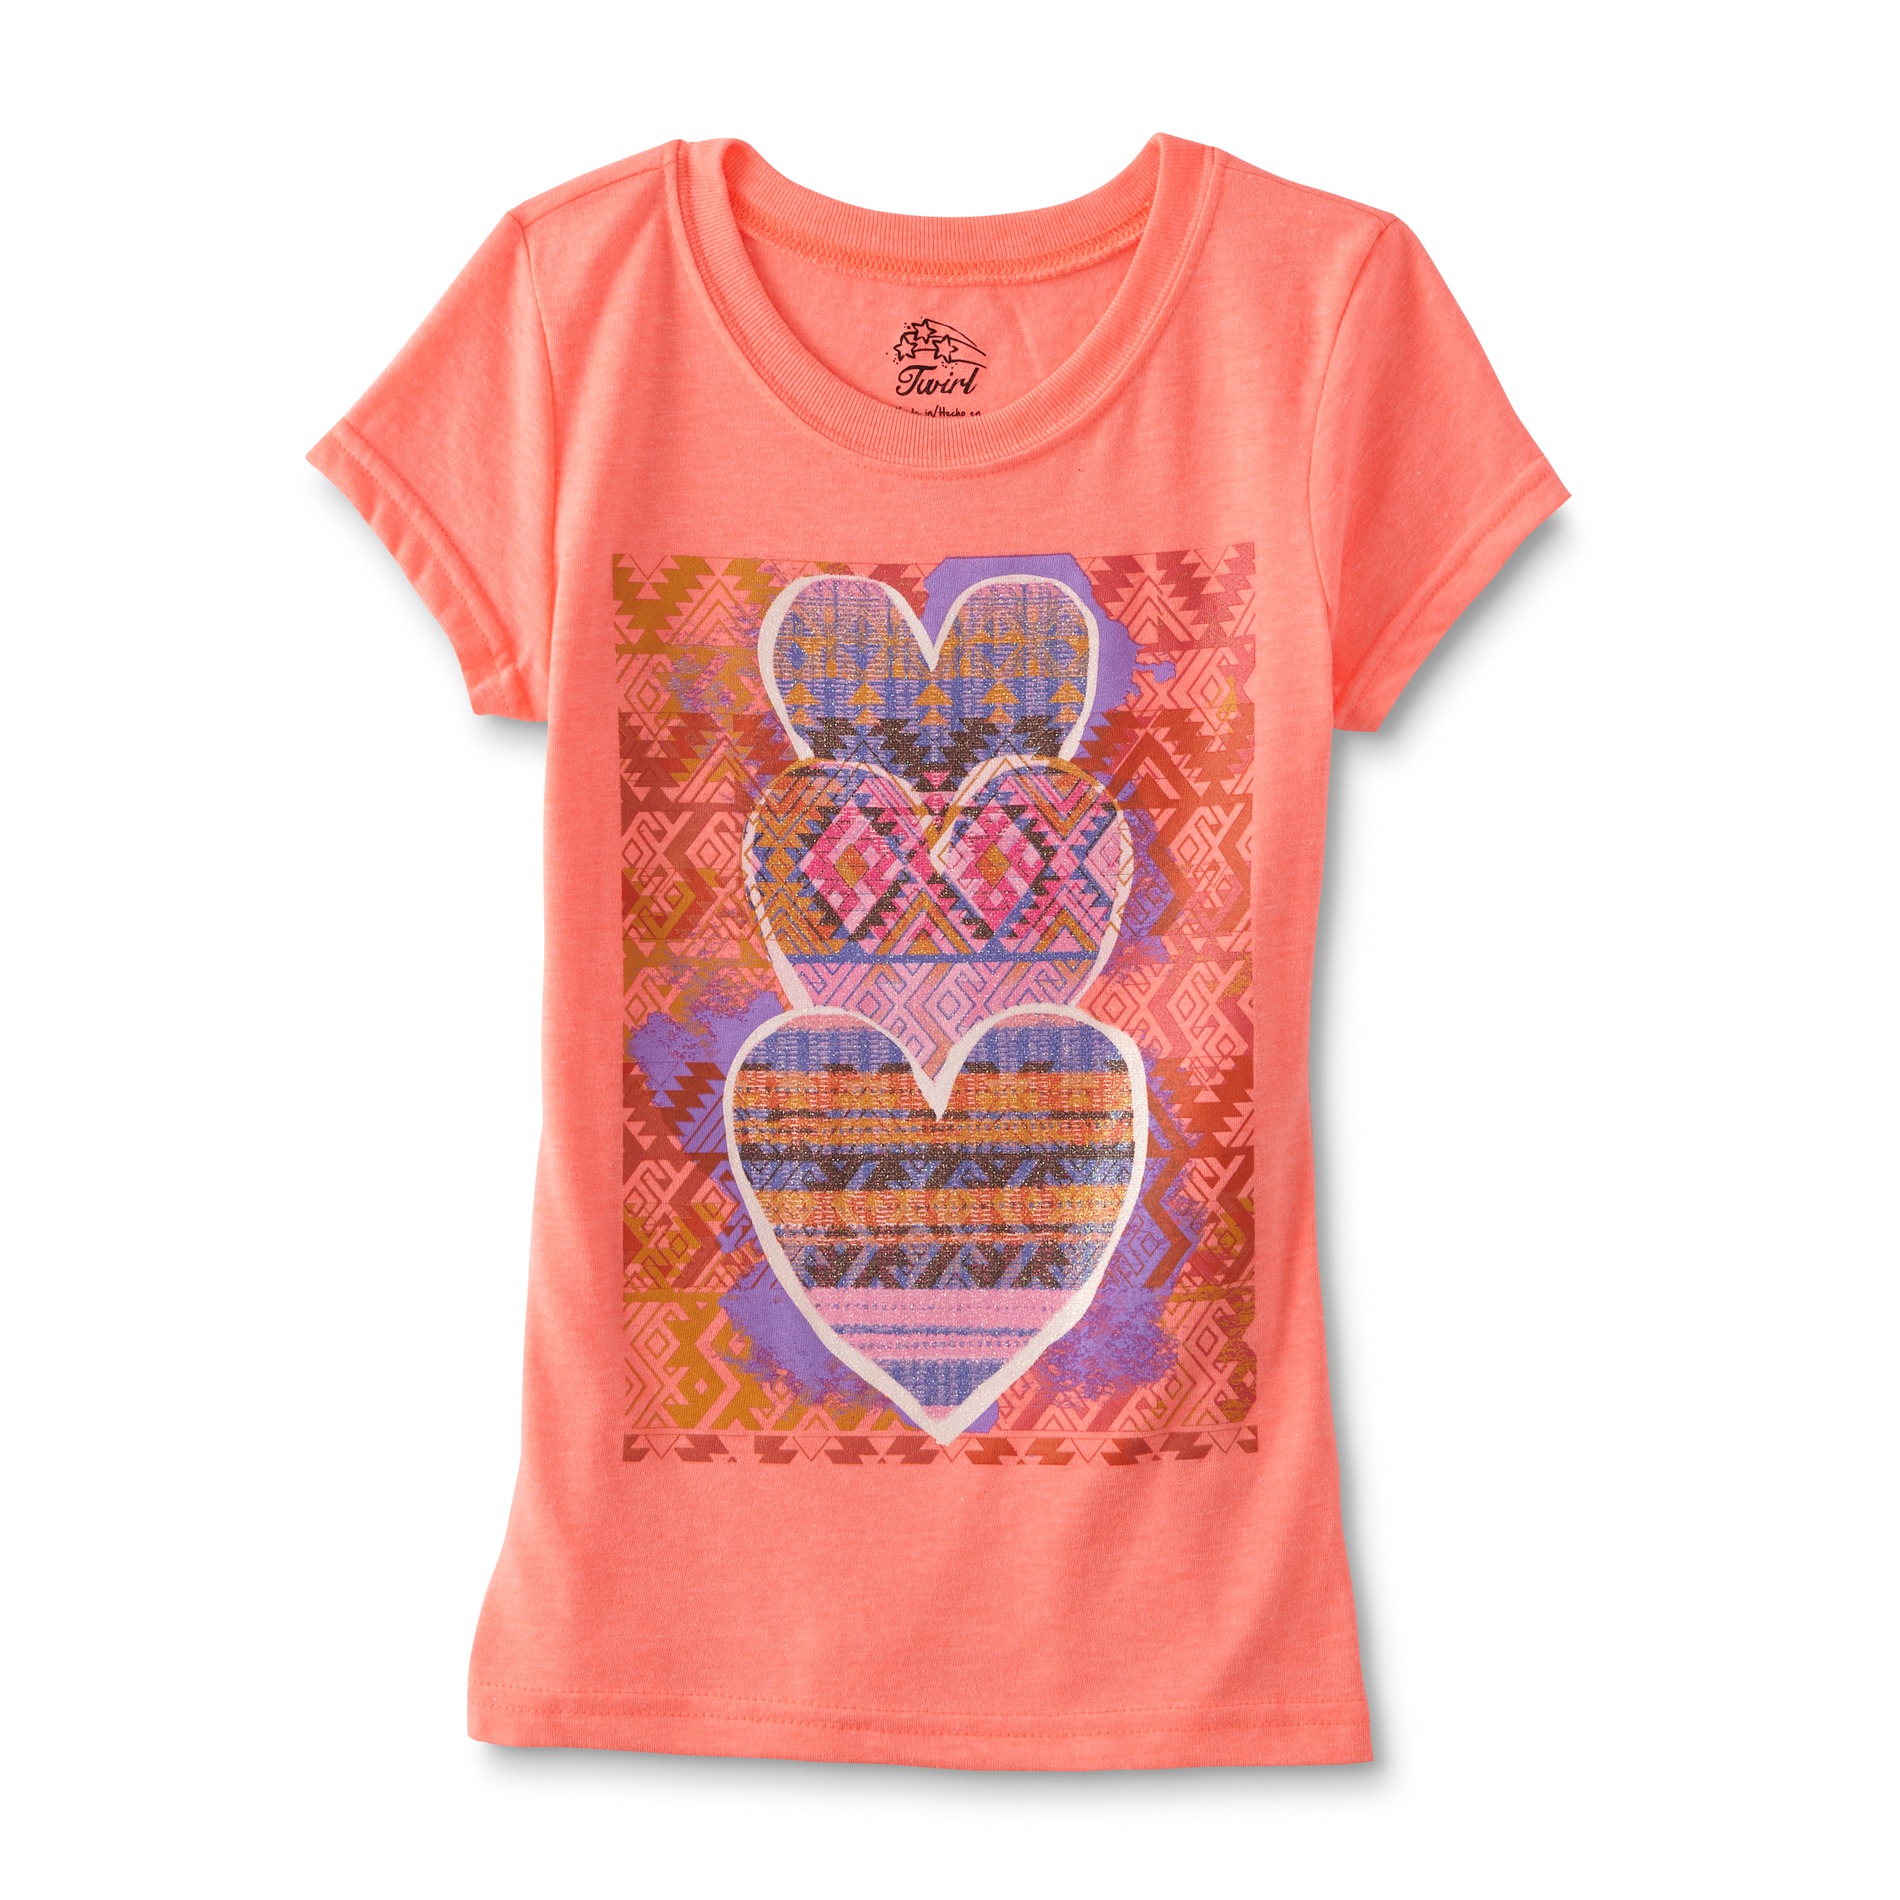 Route 66 Girls' Graphic T-Shirt - Tribal Hearts